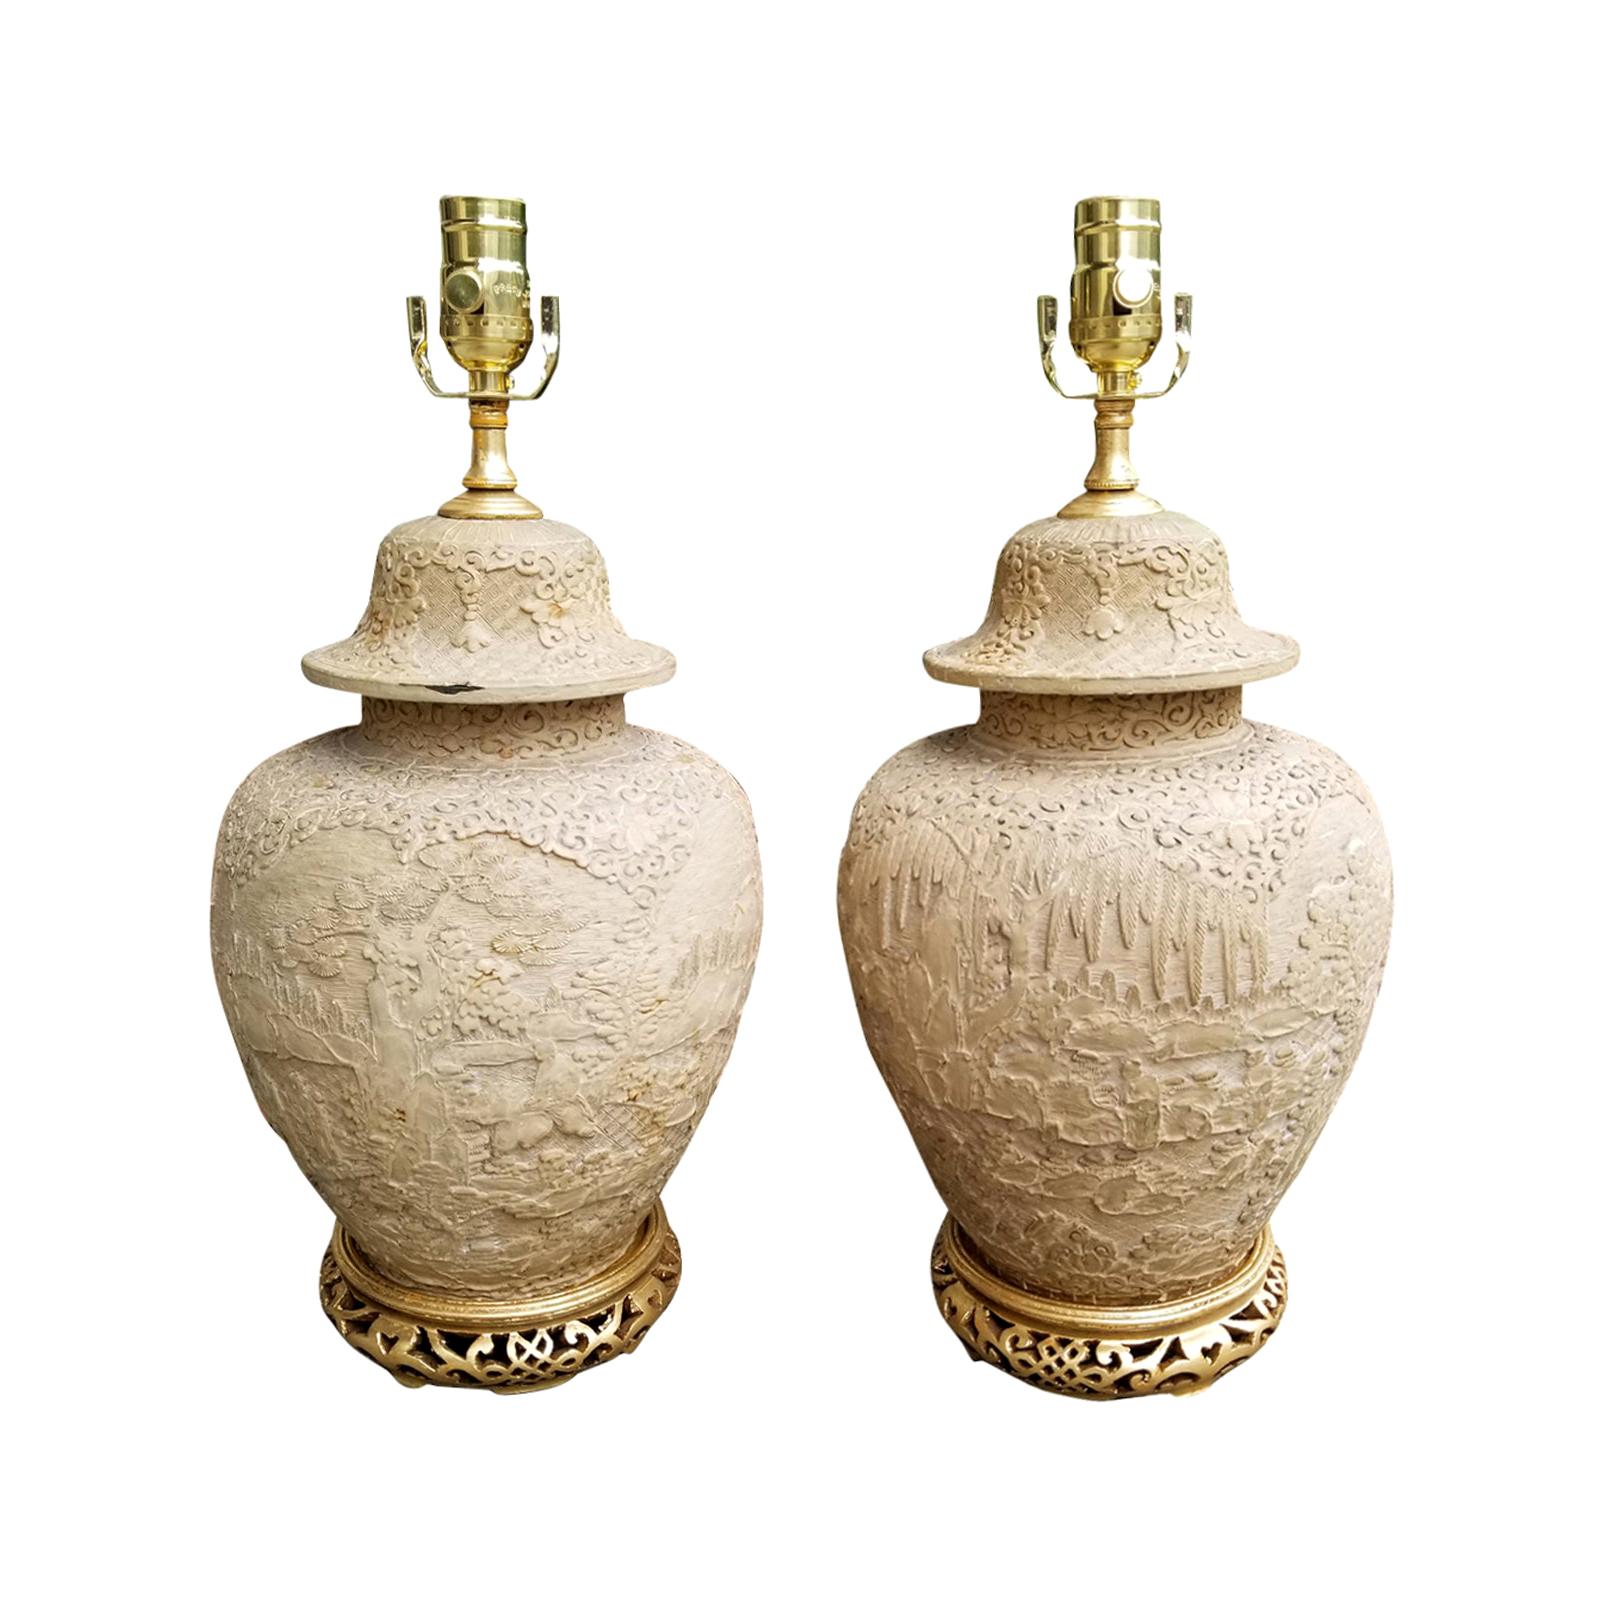 Pair of Chinese Carved Wood Lamps with Gilded Bases, circa 1880-1920